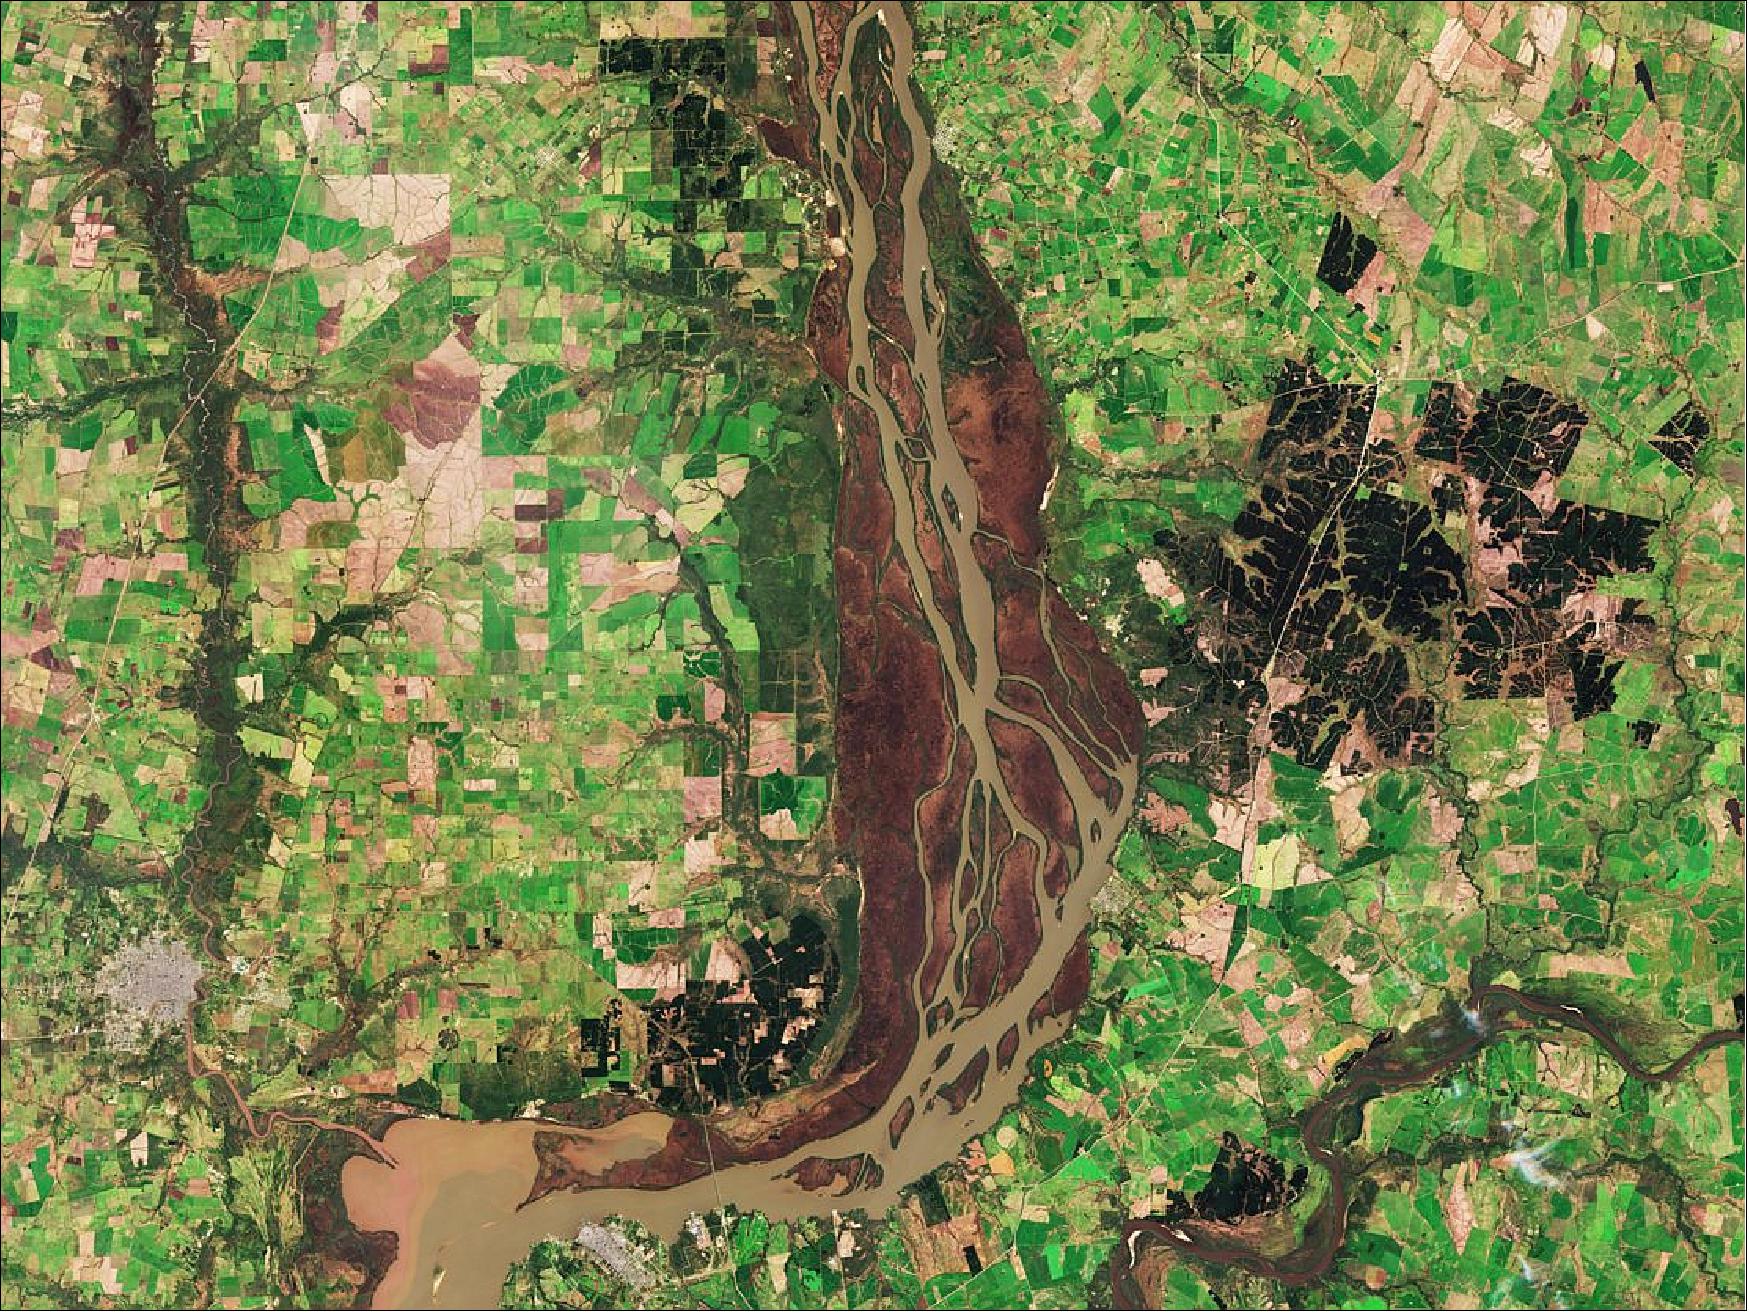 Figure 56: Sentinel-2B acquired this image of the Uruguay River wetlands on 17 August 2018, is also featured on the Earth from Space video program (image credit: ESA, the image contains modified Copernicus Sentinel data (2018), processed by ESA, CC BY-SA 3.0 IGO)